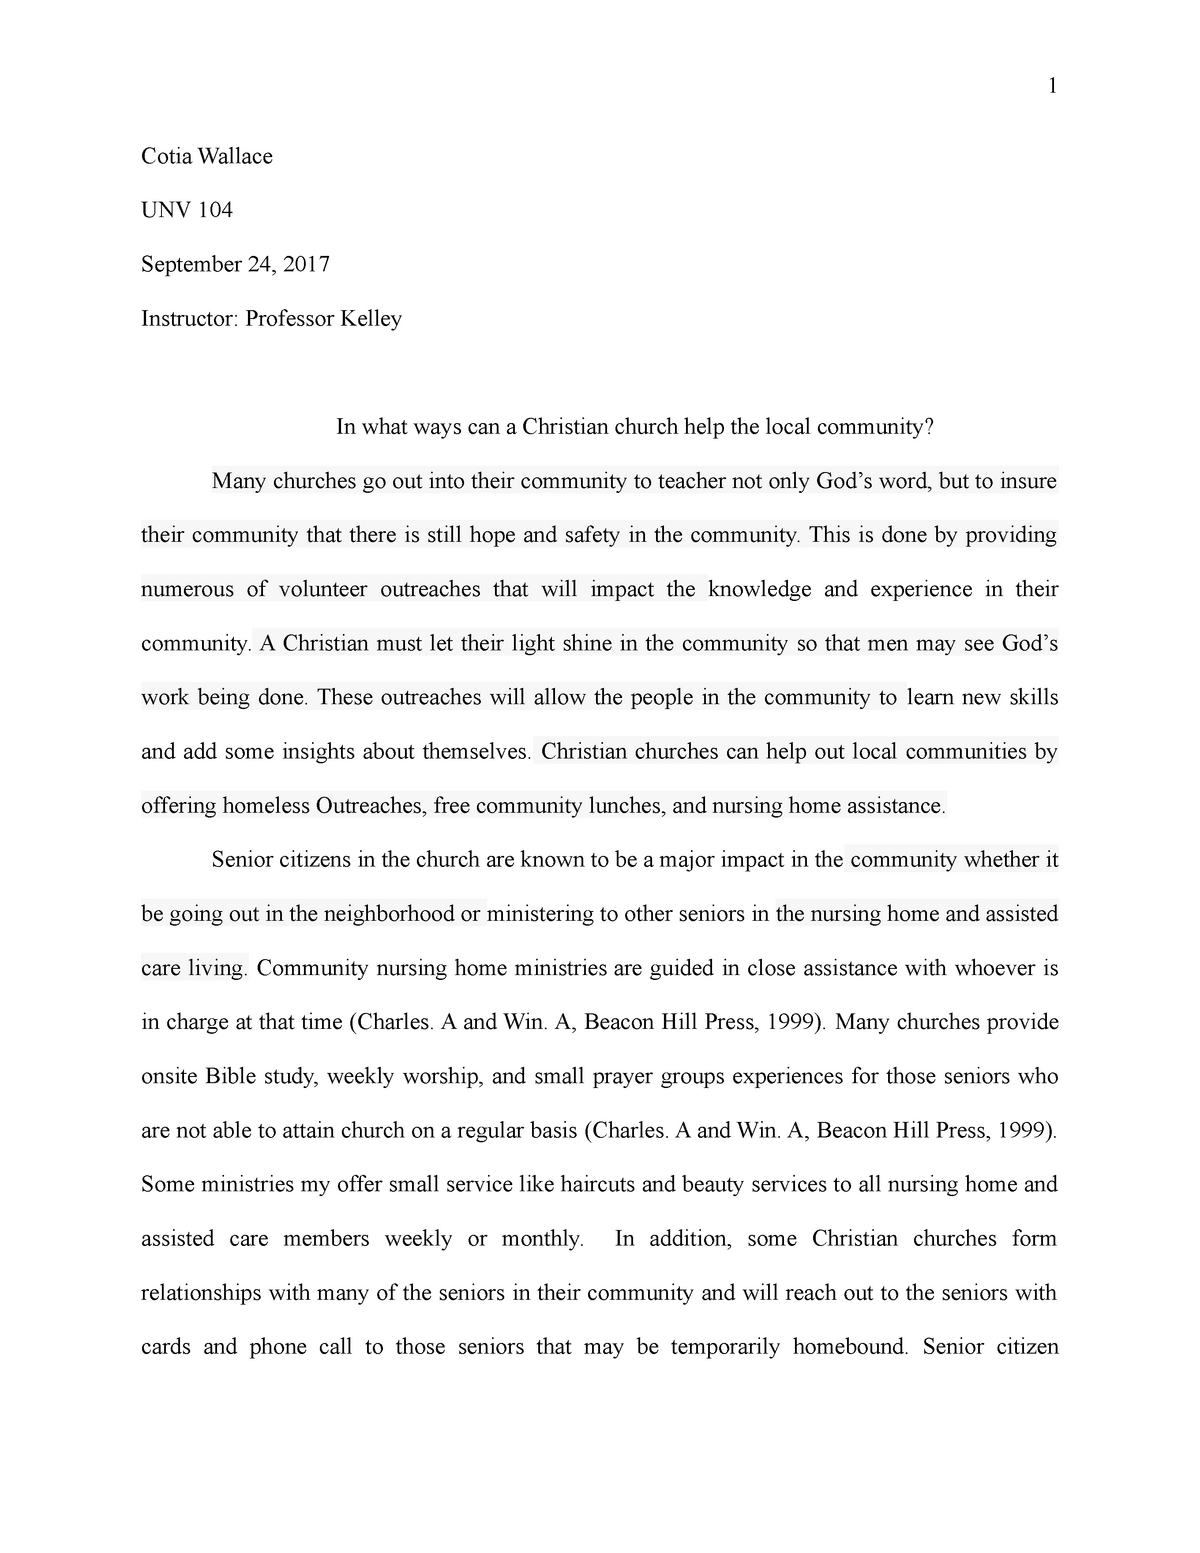 examples of written rough draft essay